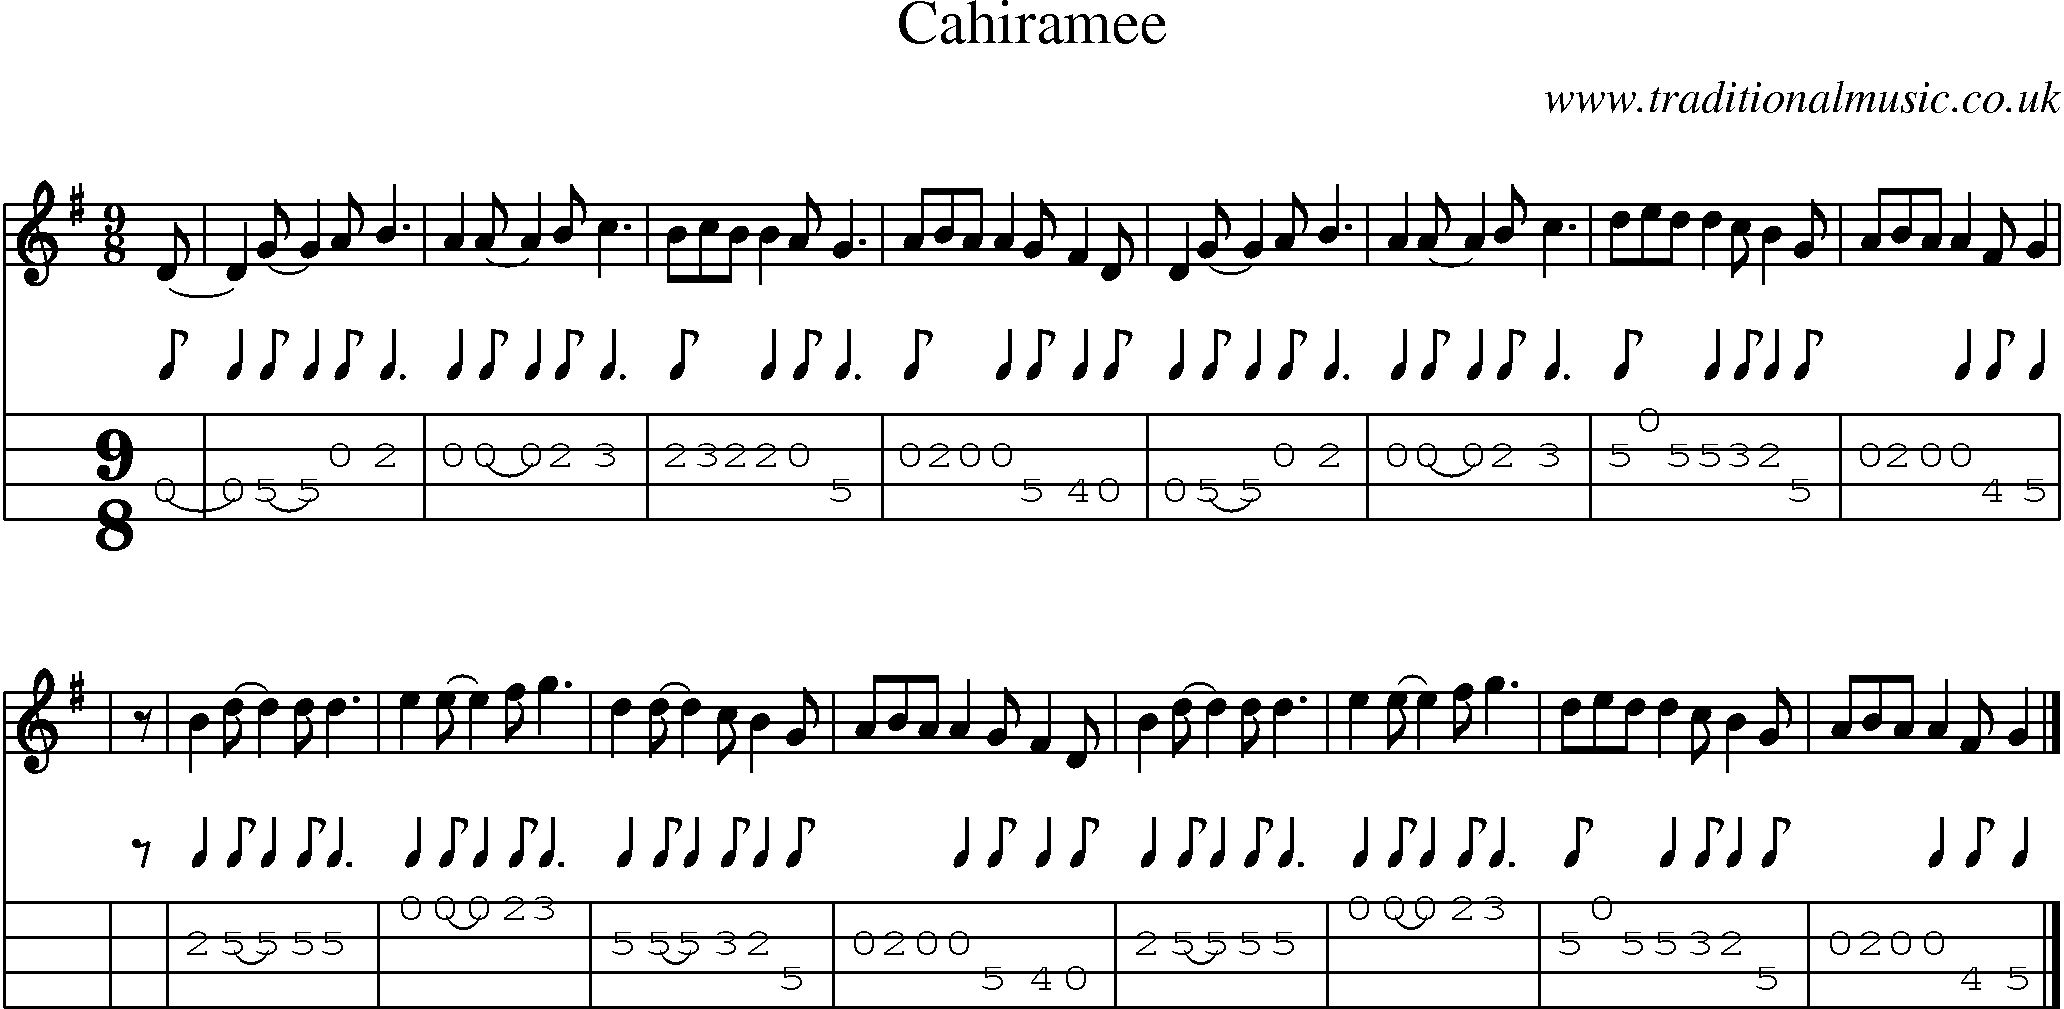 Music Score and Mandolin Tabs for Cahiramee